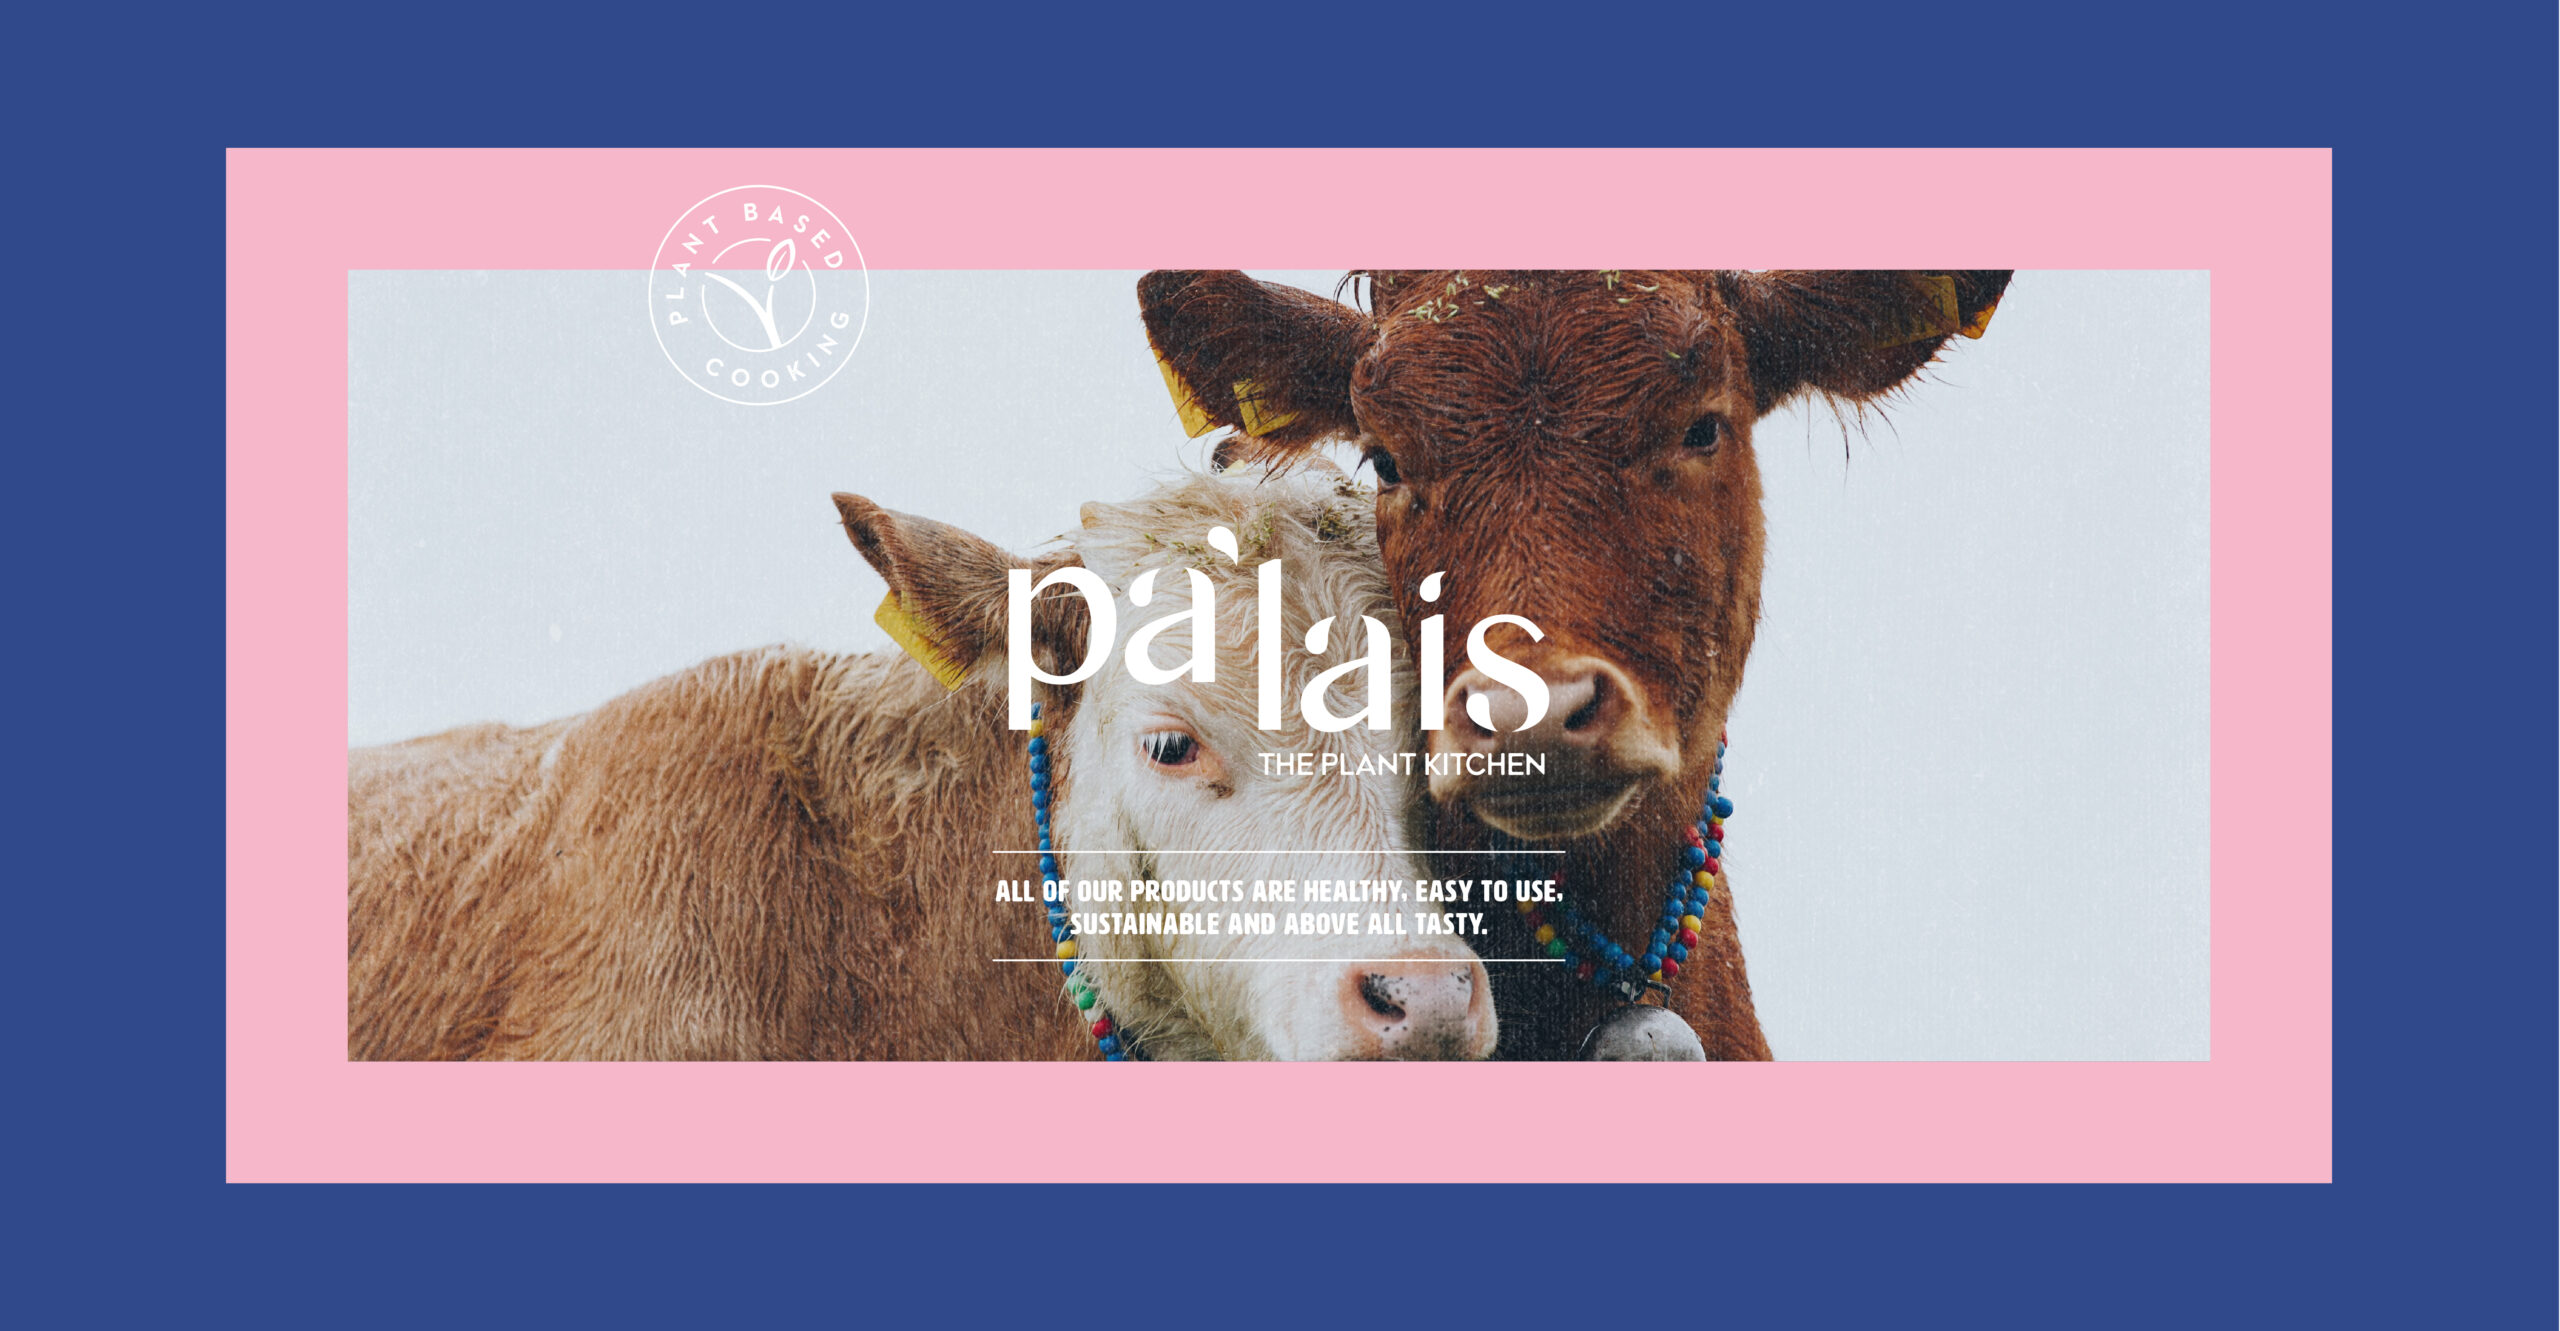 Pa'lais visual identity created by our Brussels communications agency